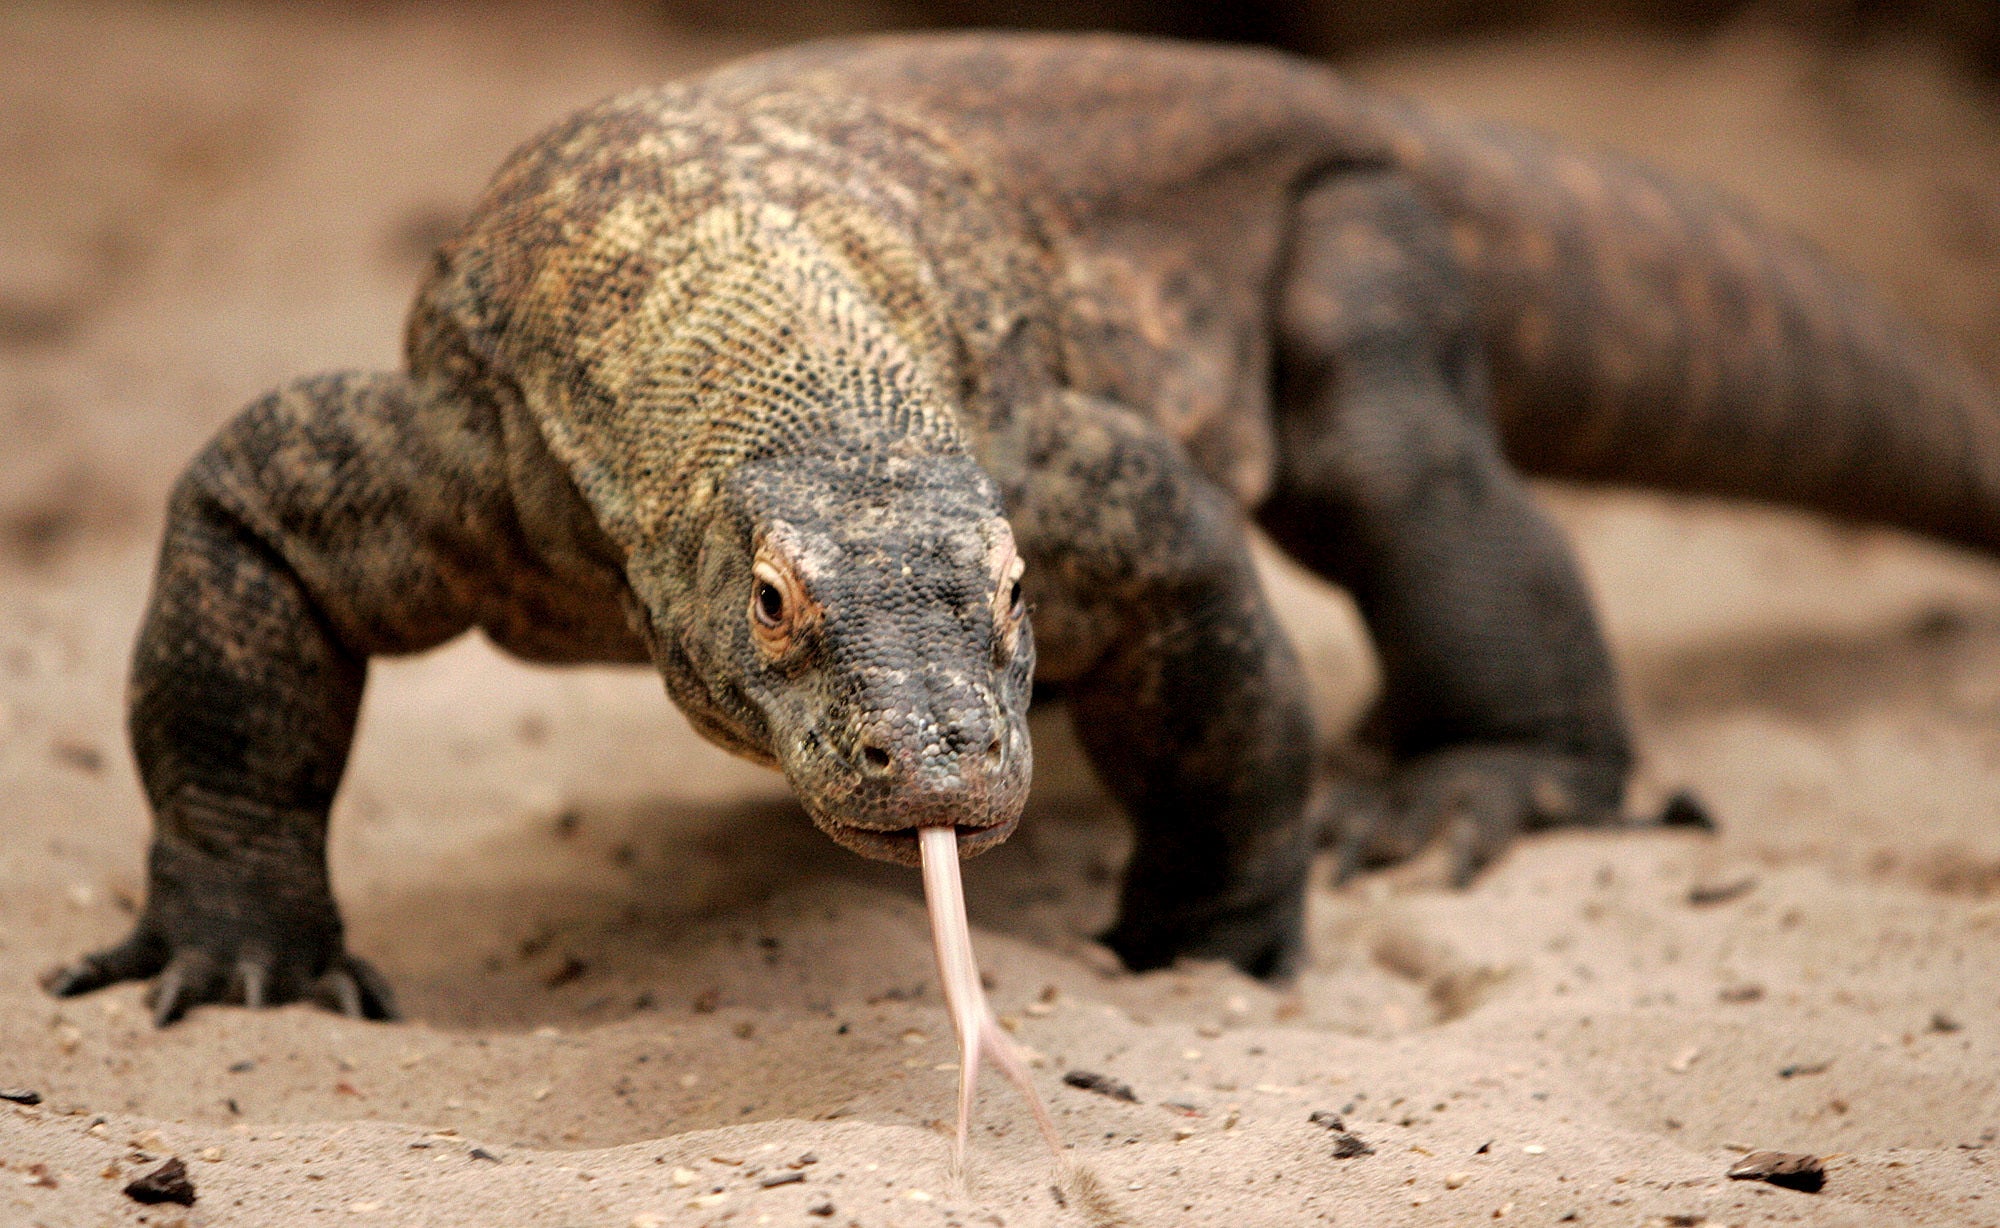 Flora the Komodo dragon walks around her enclosure at Chester Zoo in Chester, England